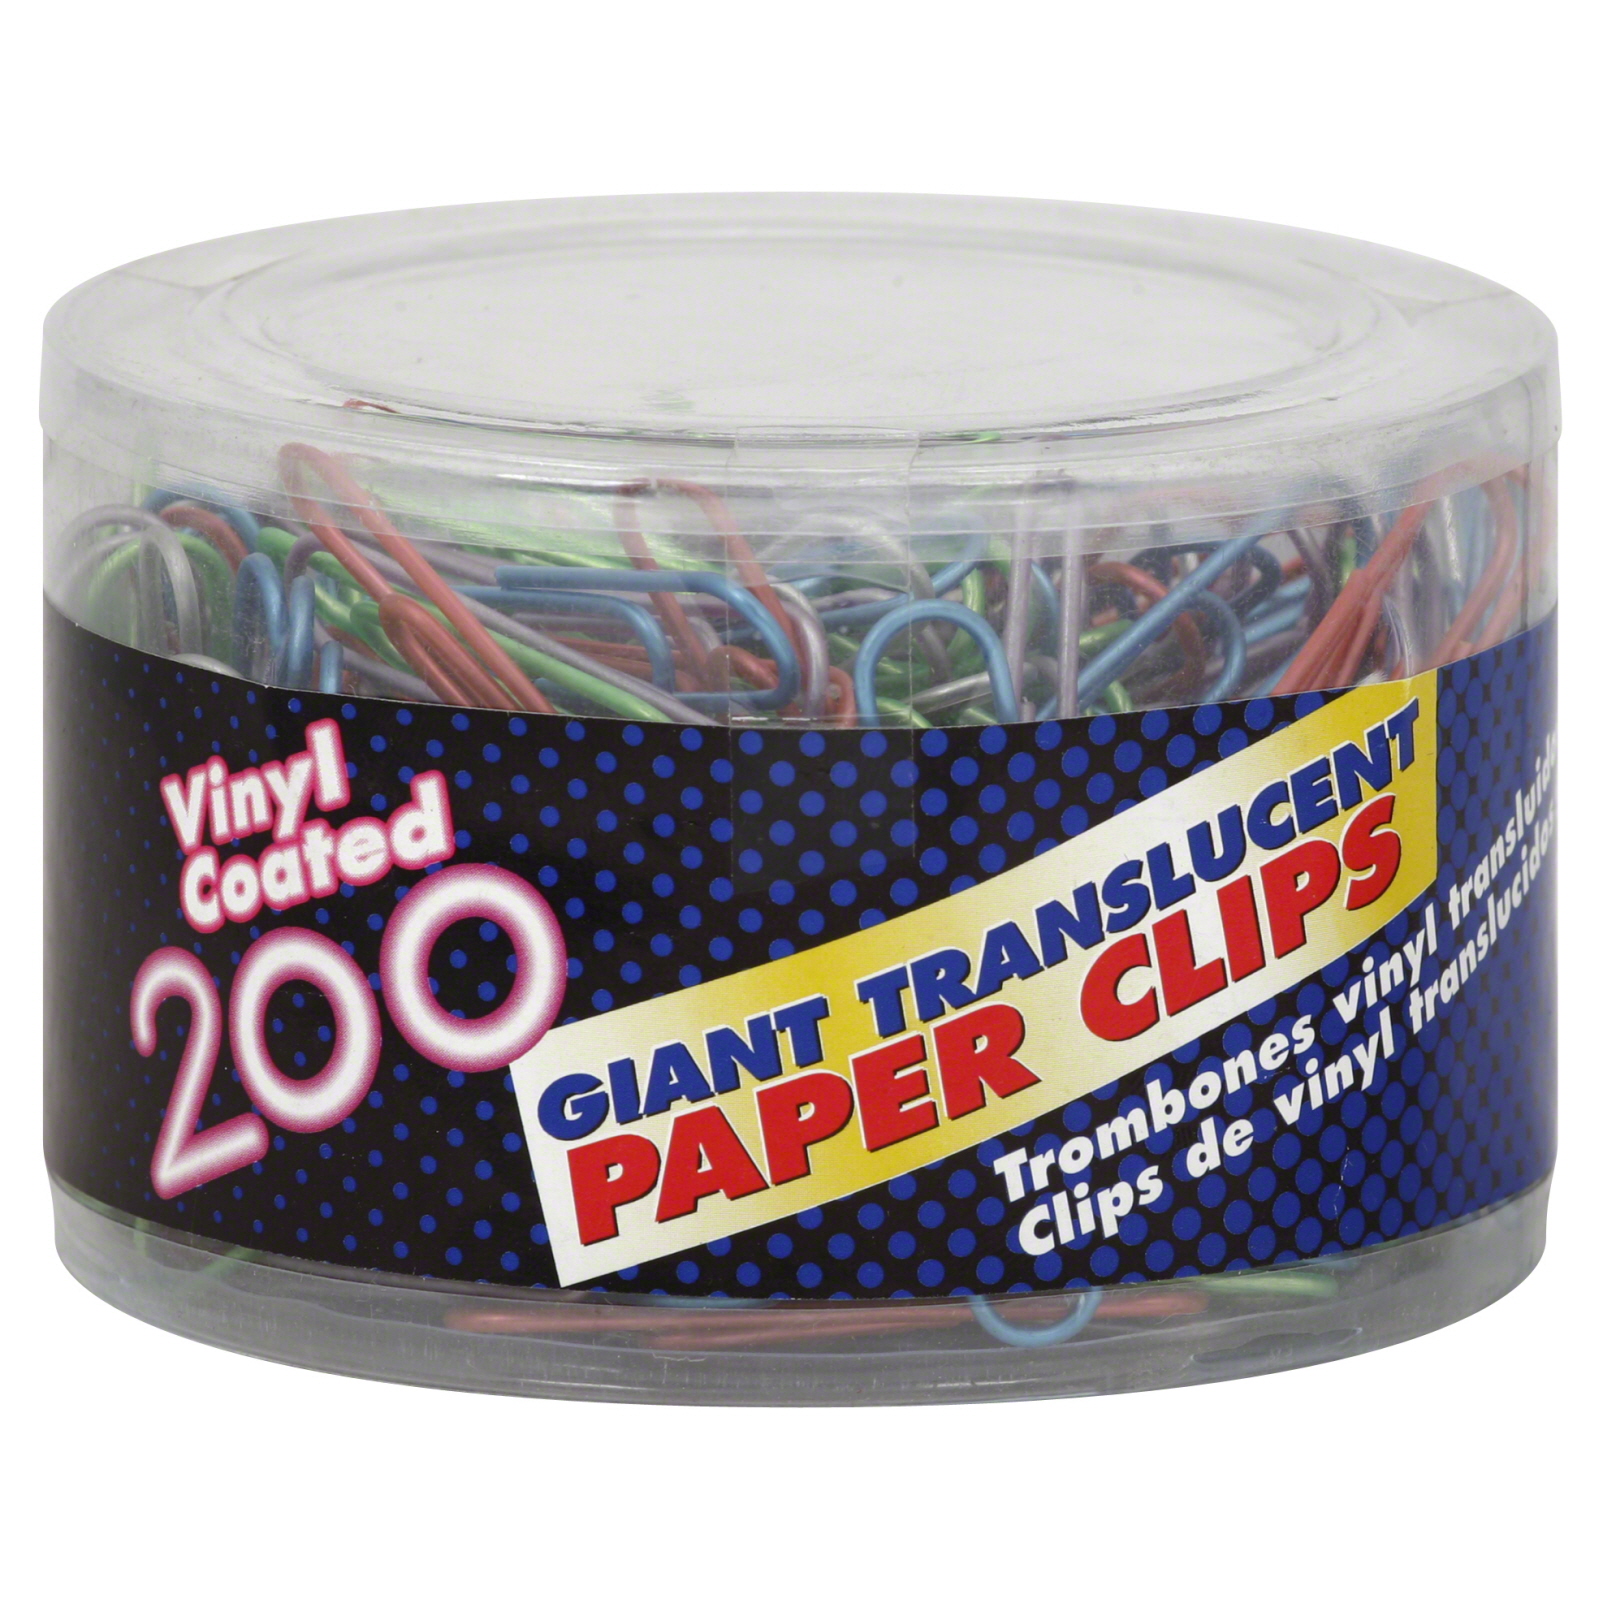 97212 OIC Paper Clips, Vinyl Coated, Giant Translucent, 200 paper clips